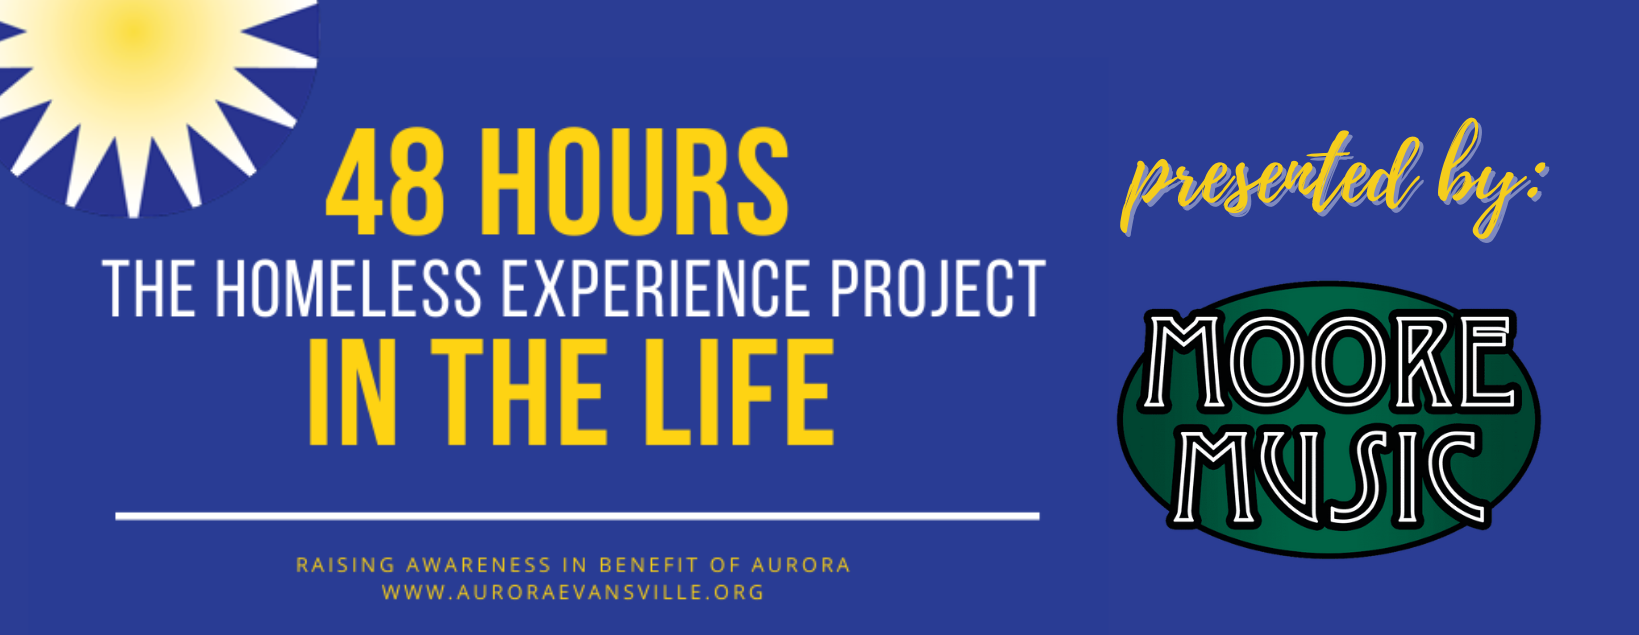 48 Hours in the Life: The Homeless Experience Project